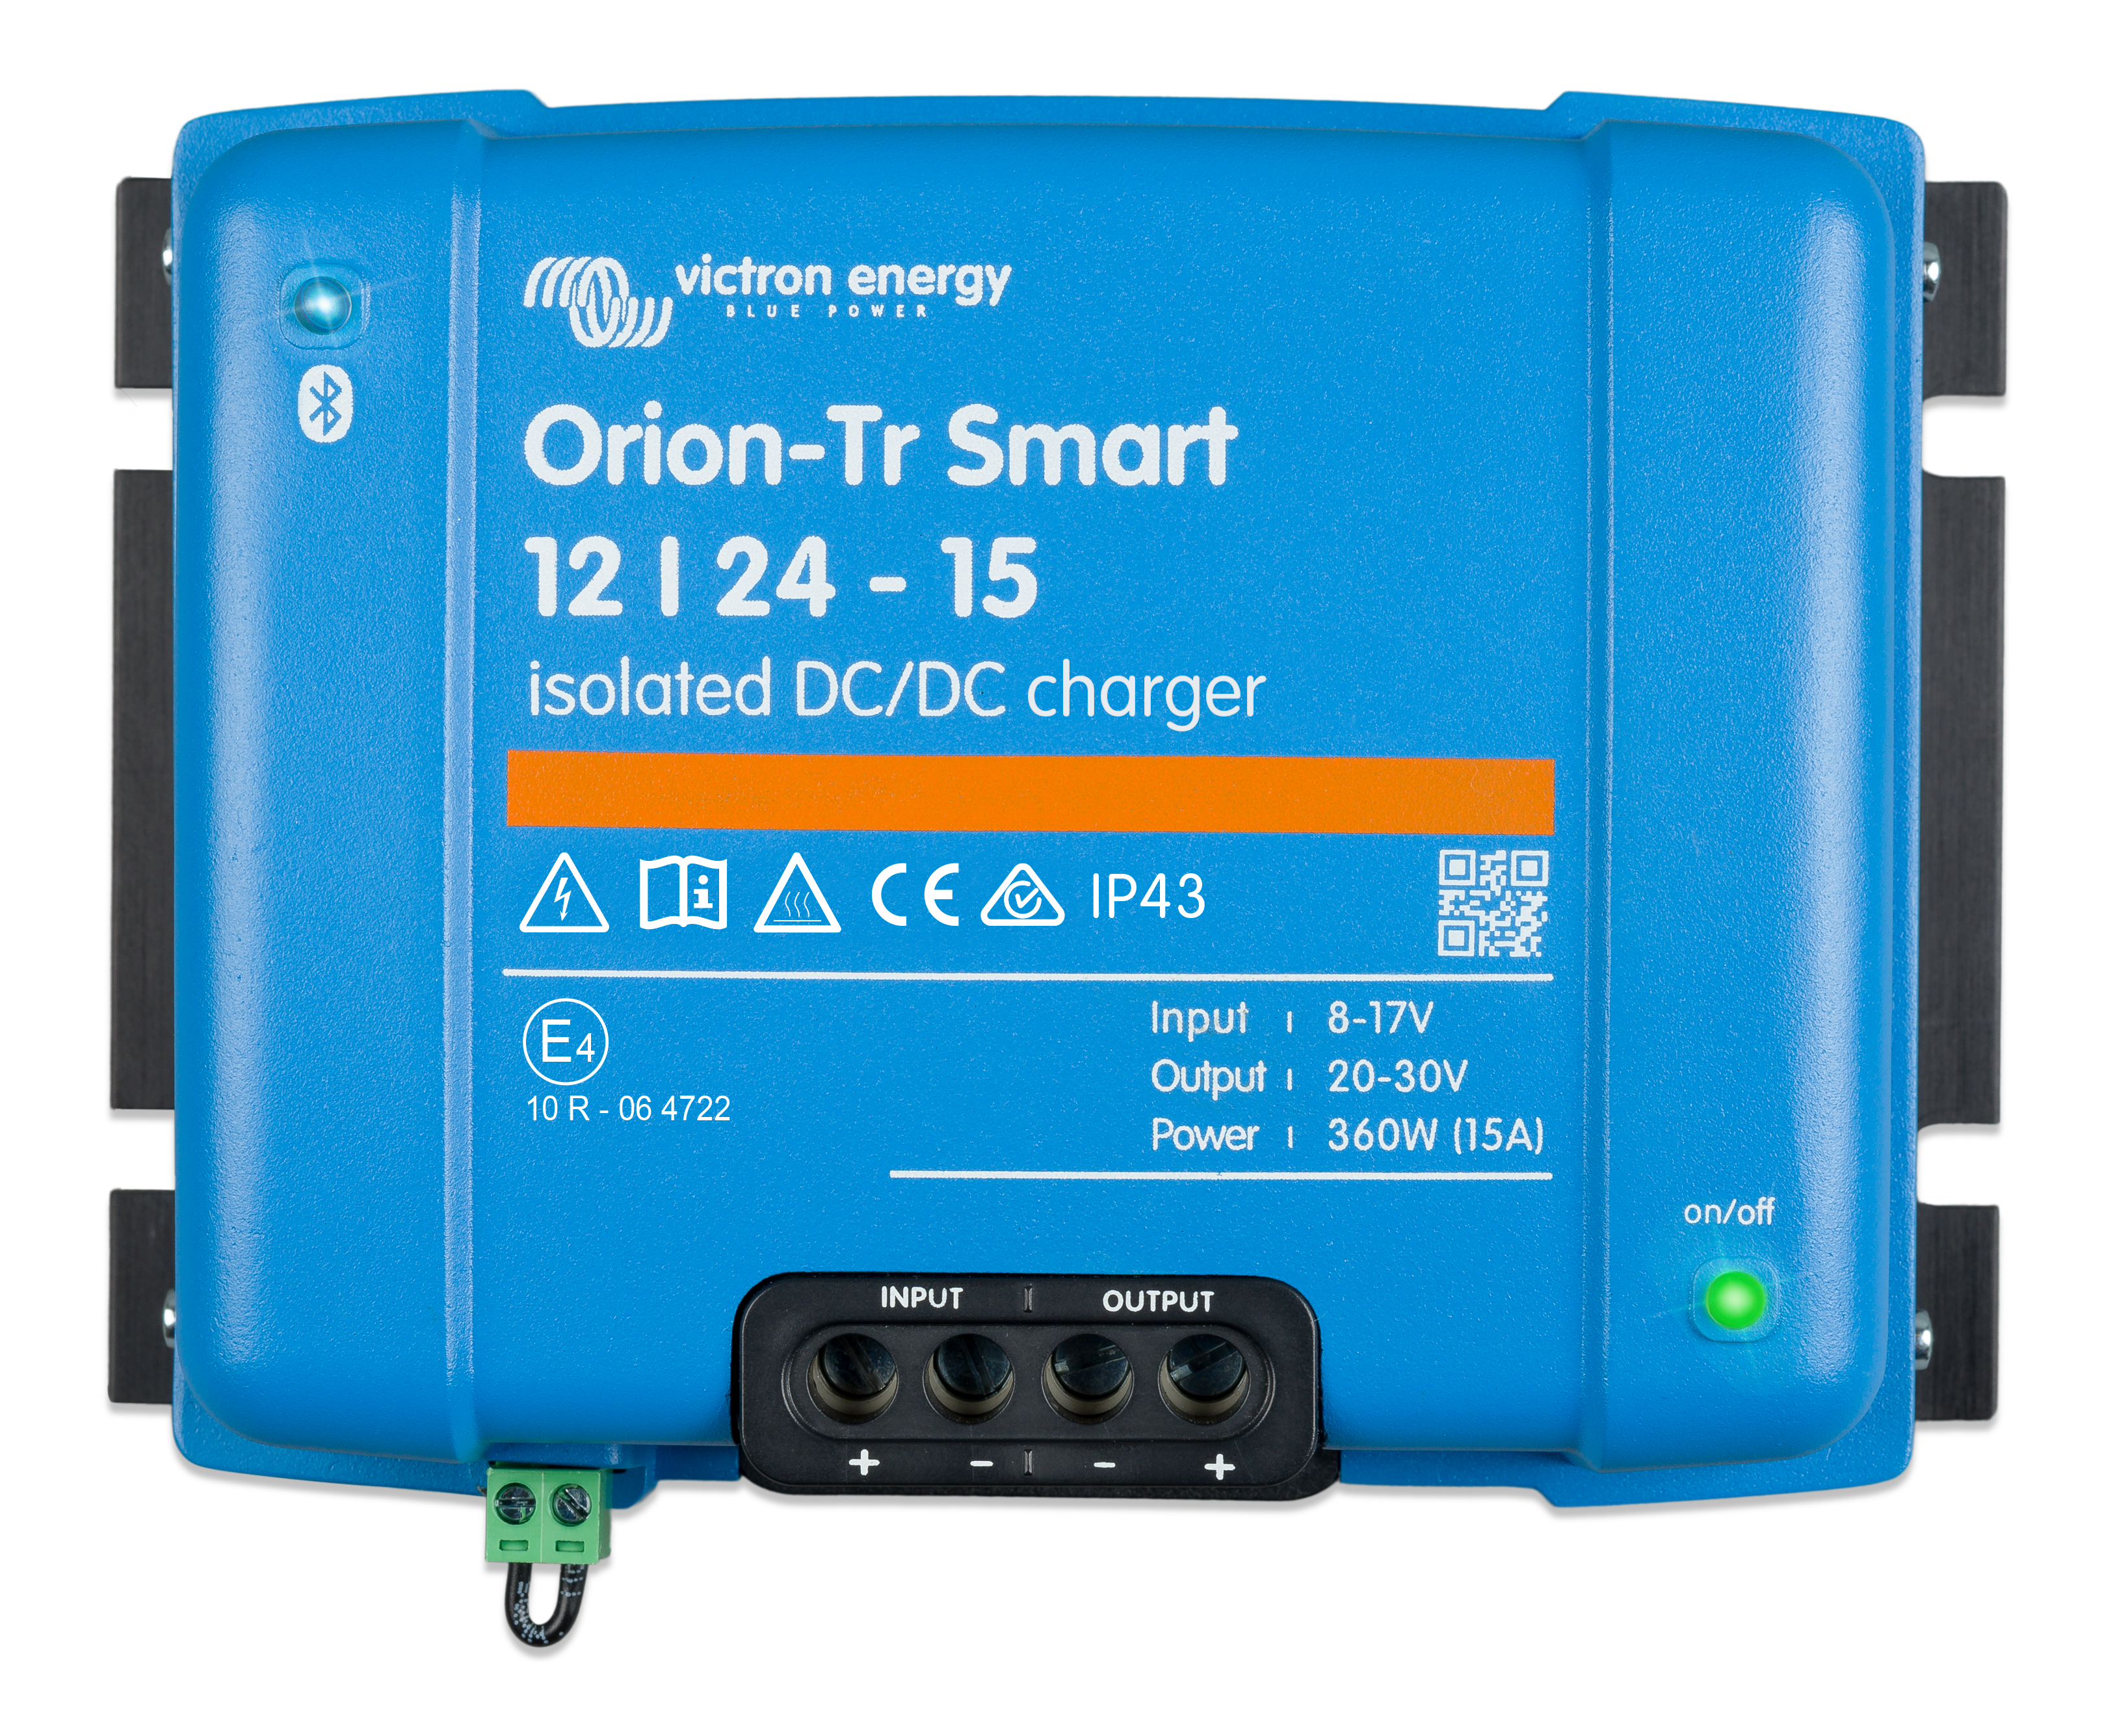 Reinig de vloer Lam staan Orion-Tr Smart DC-DC Charger Isolated - Victron Energy